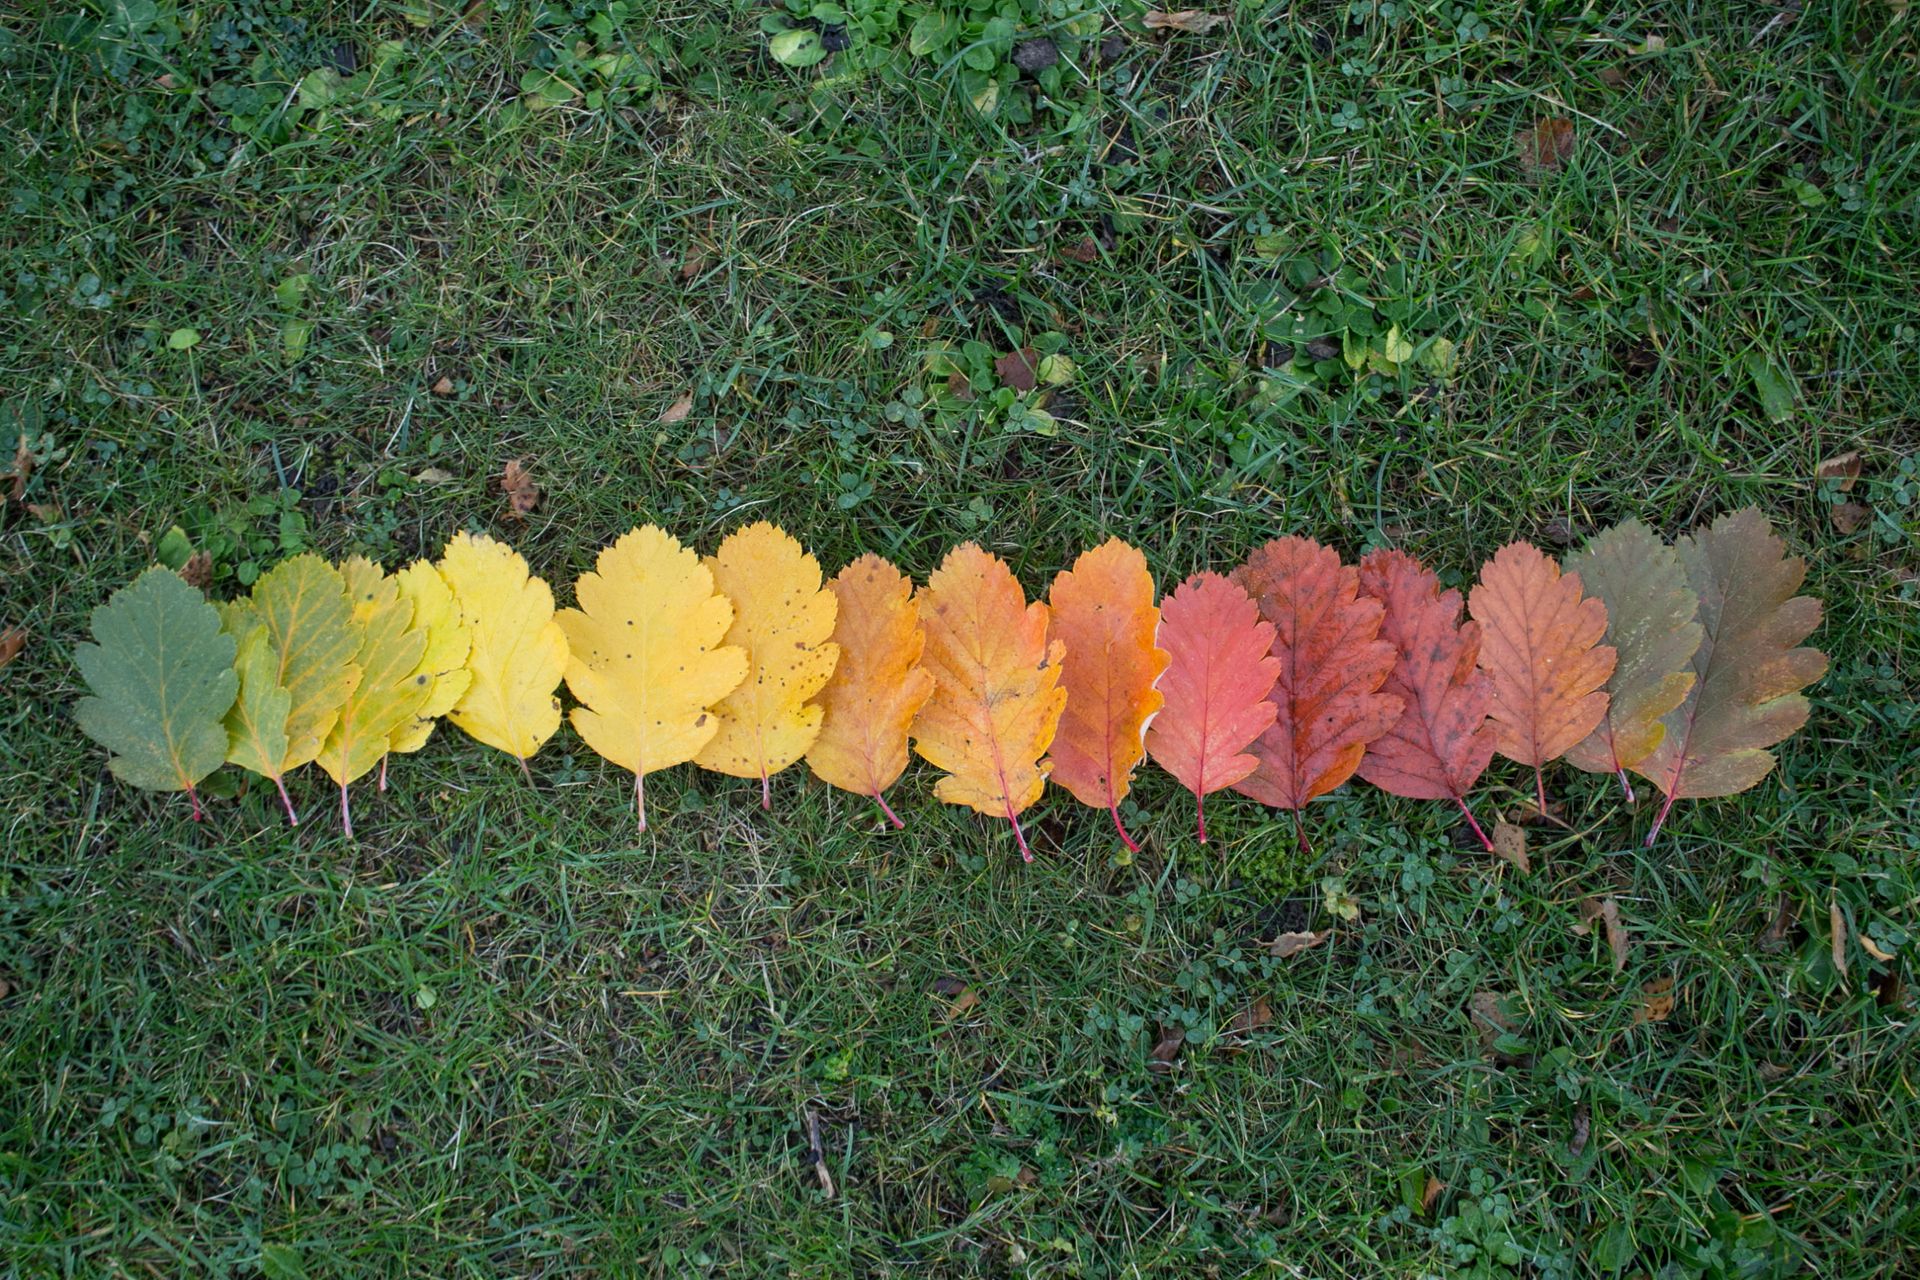 Orange, yellow and red leaves.